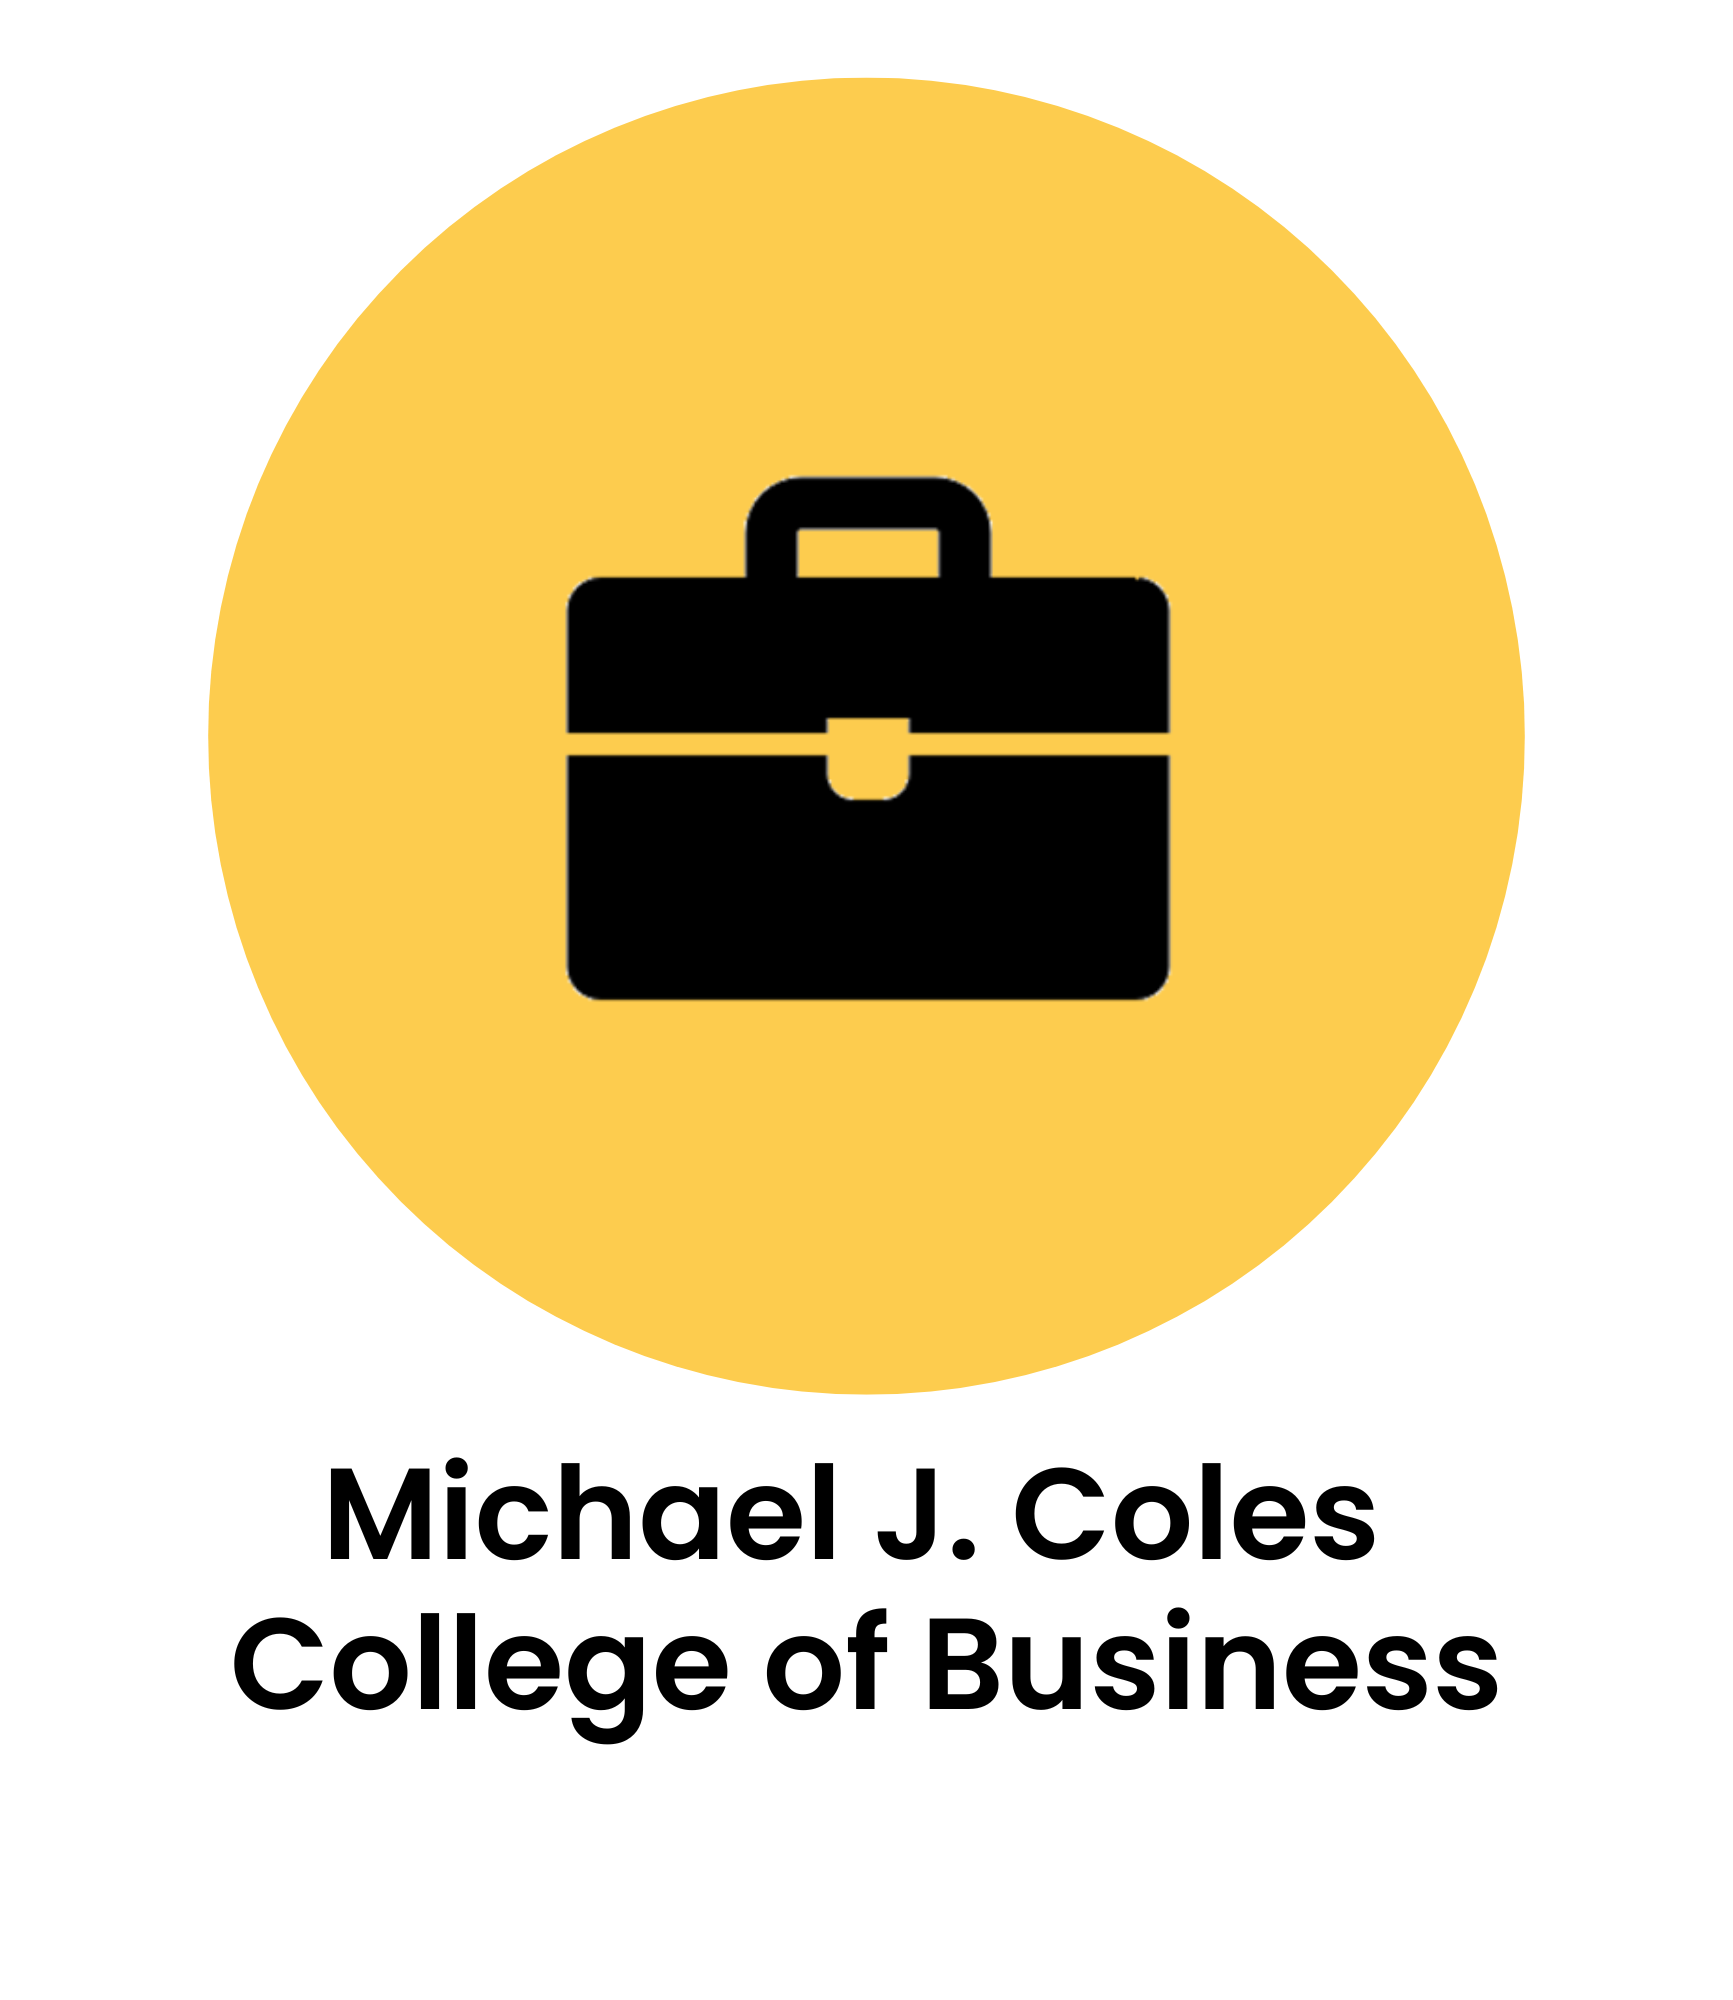 [text] Michael J. Coles College of Business